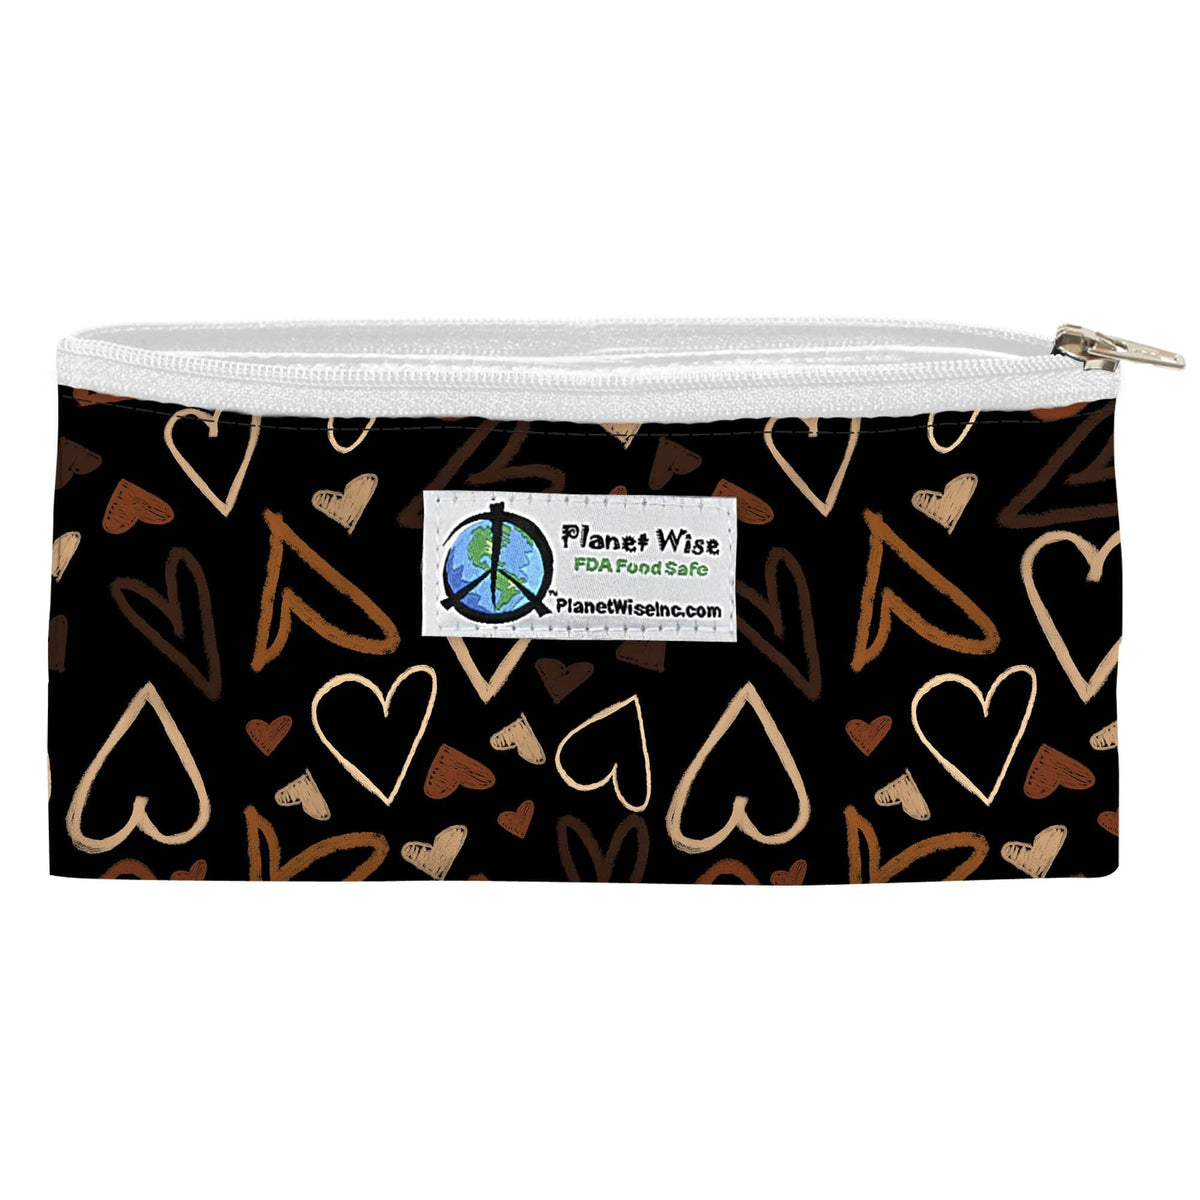 Planet Wise Reusable Printed Zipper Snack Bag Hearts United